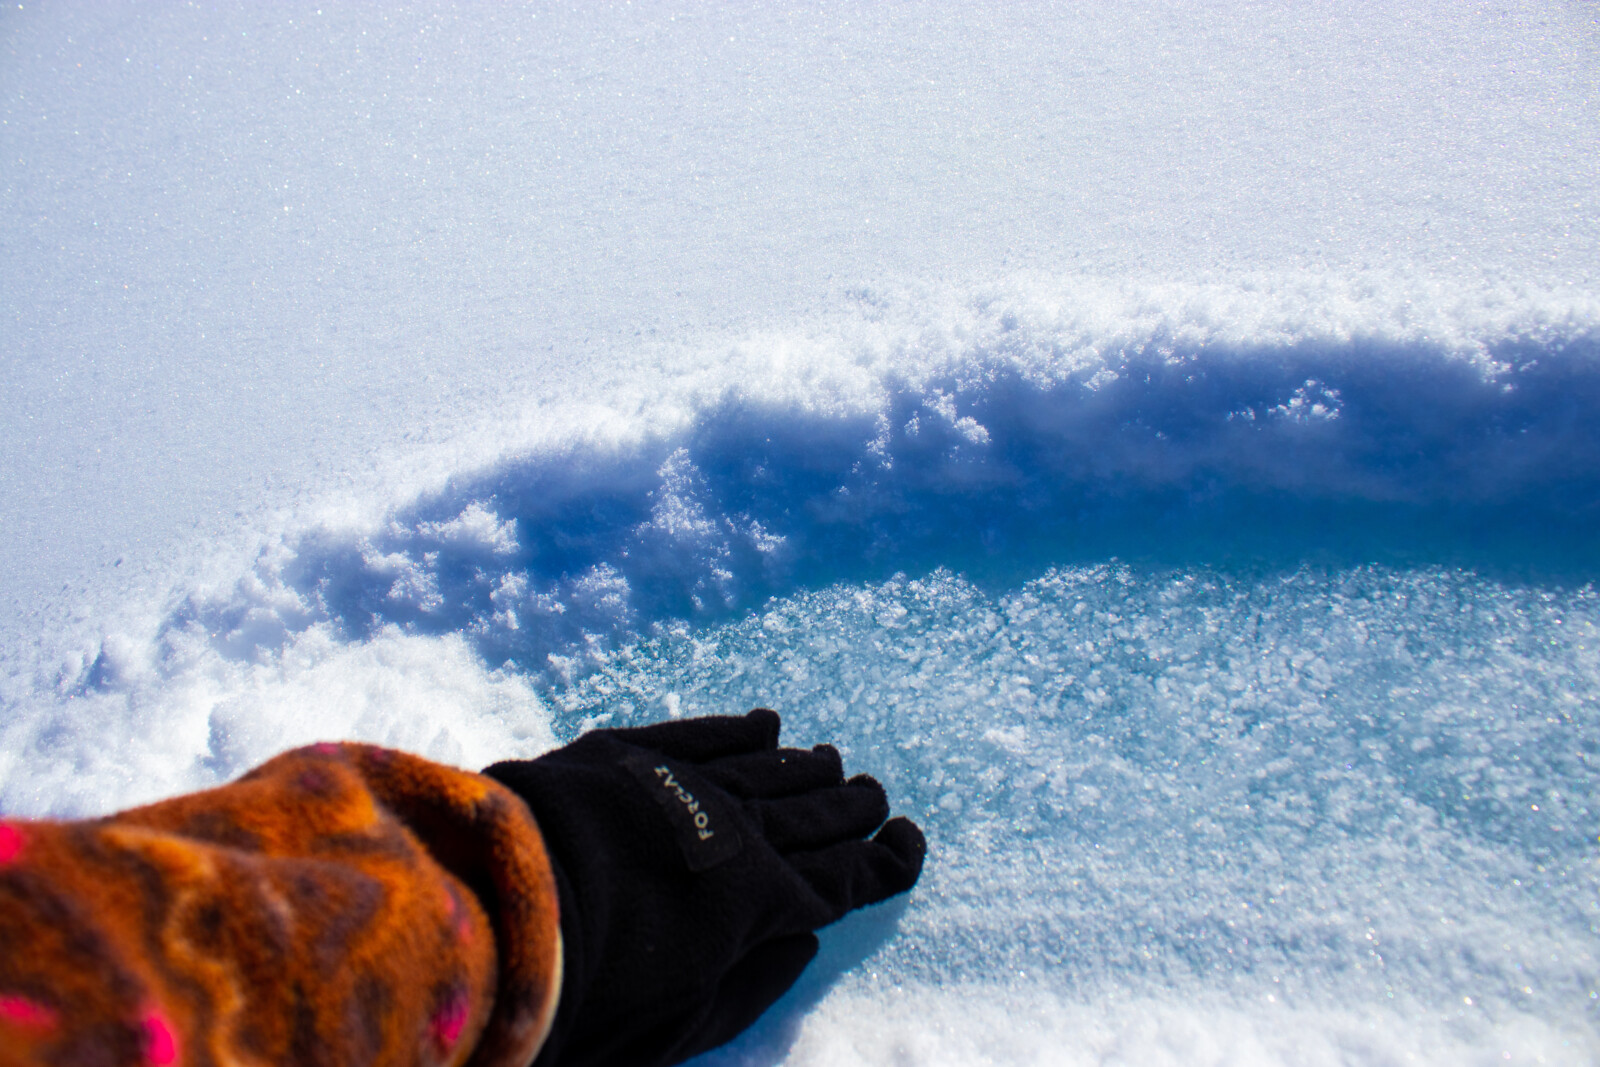 A gloves hand swipes away snow to find blue ice underneath.